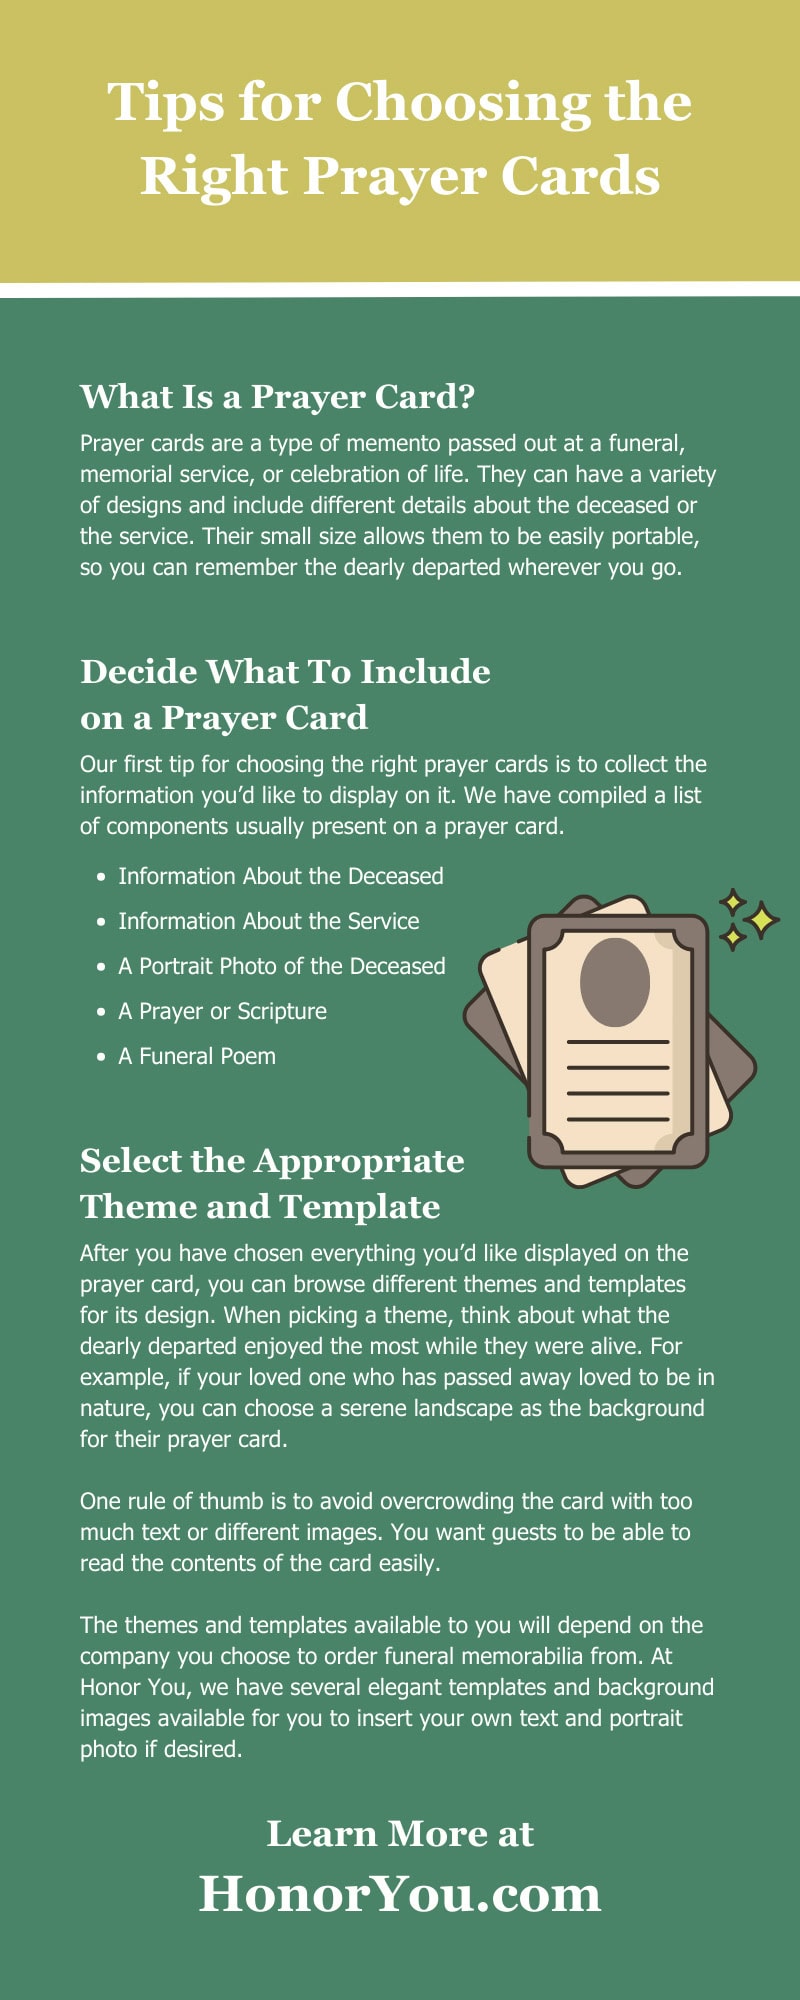 Tips for Choosing the Right Prayer Cards